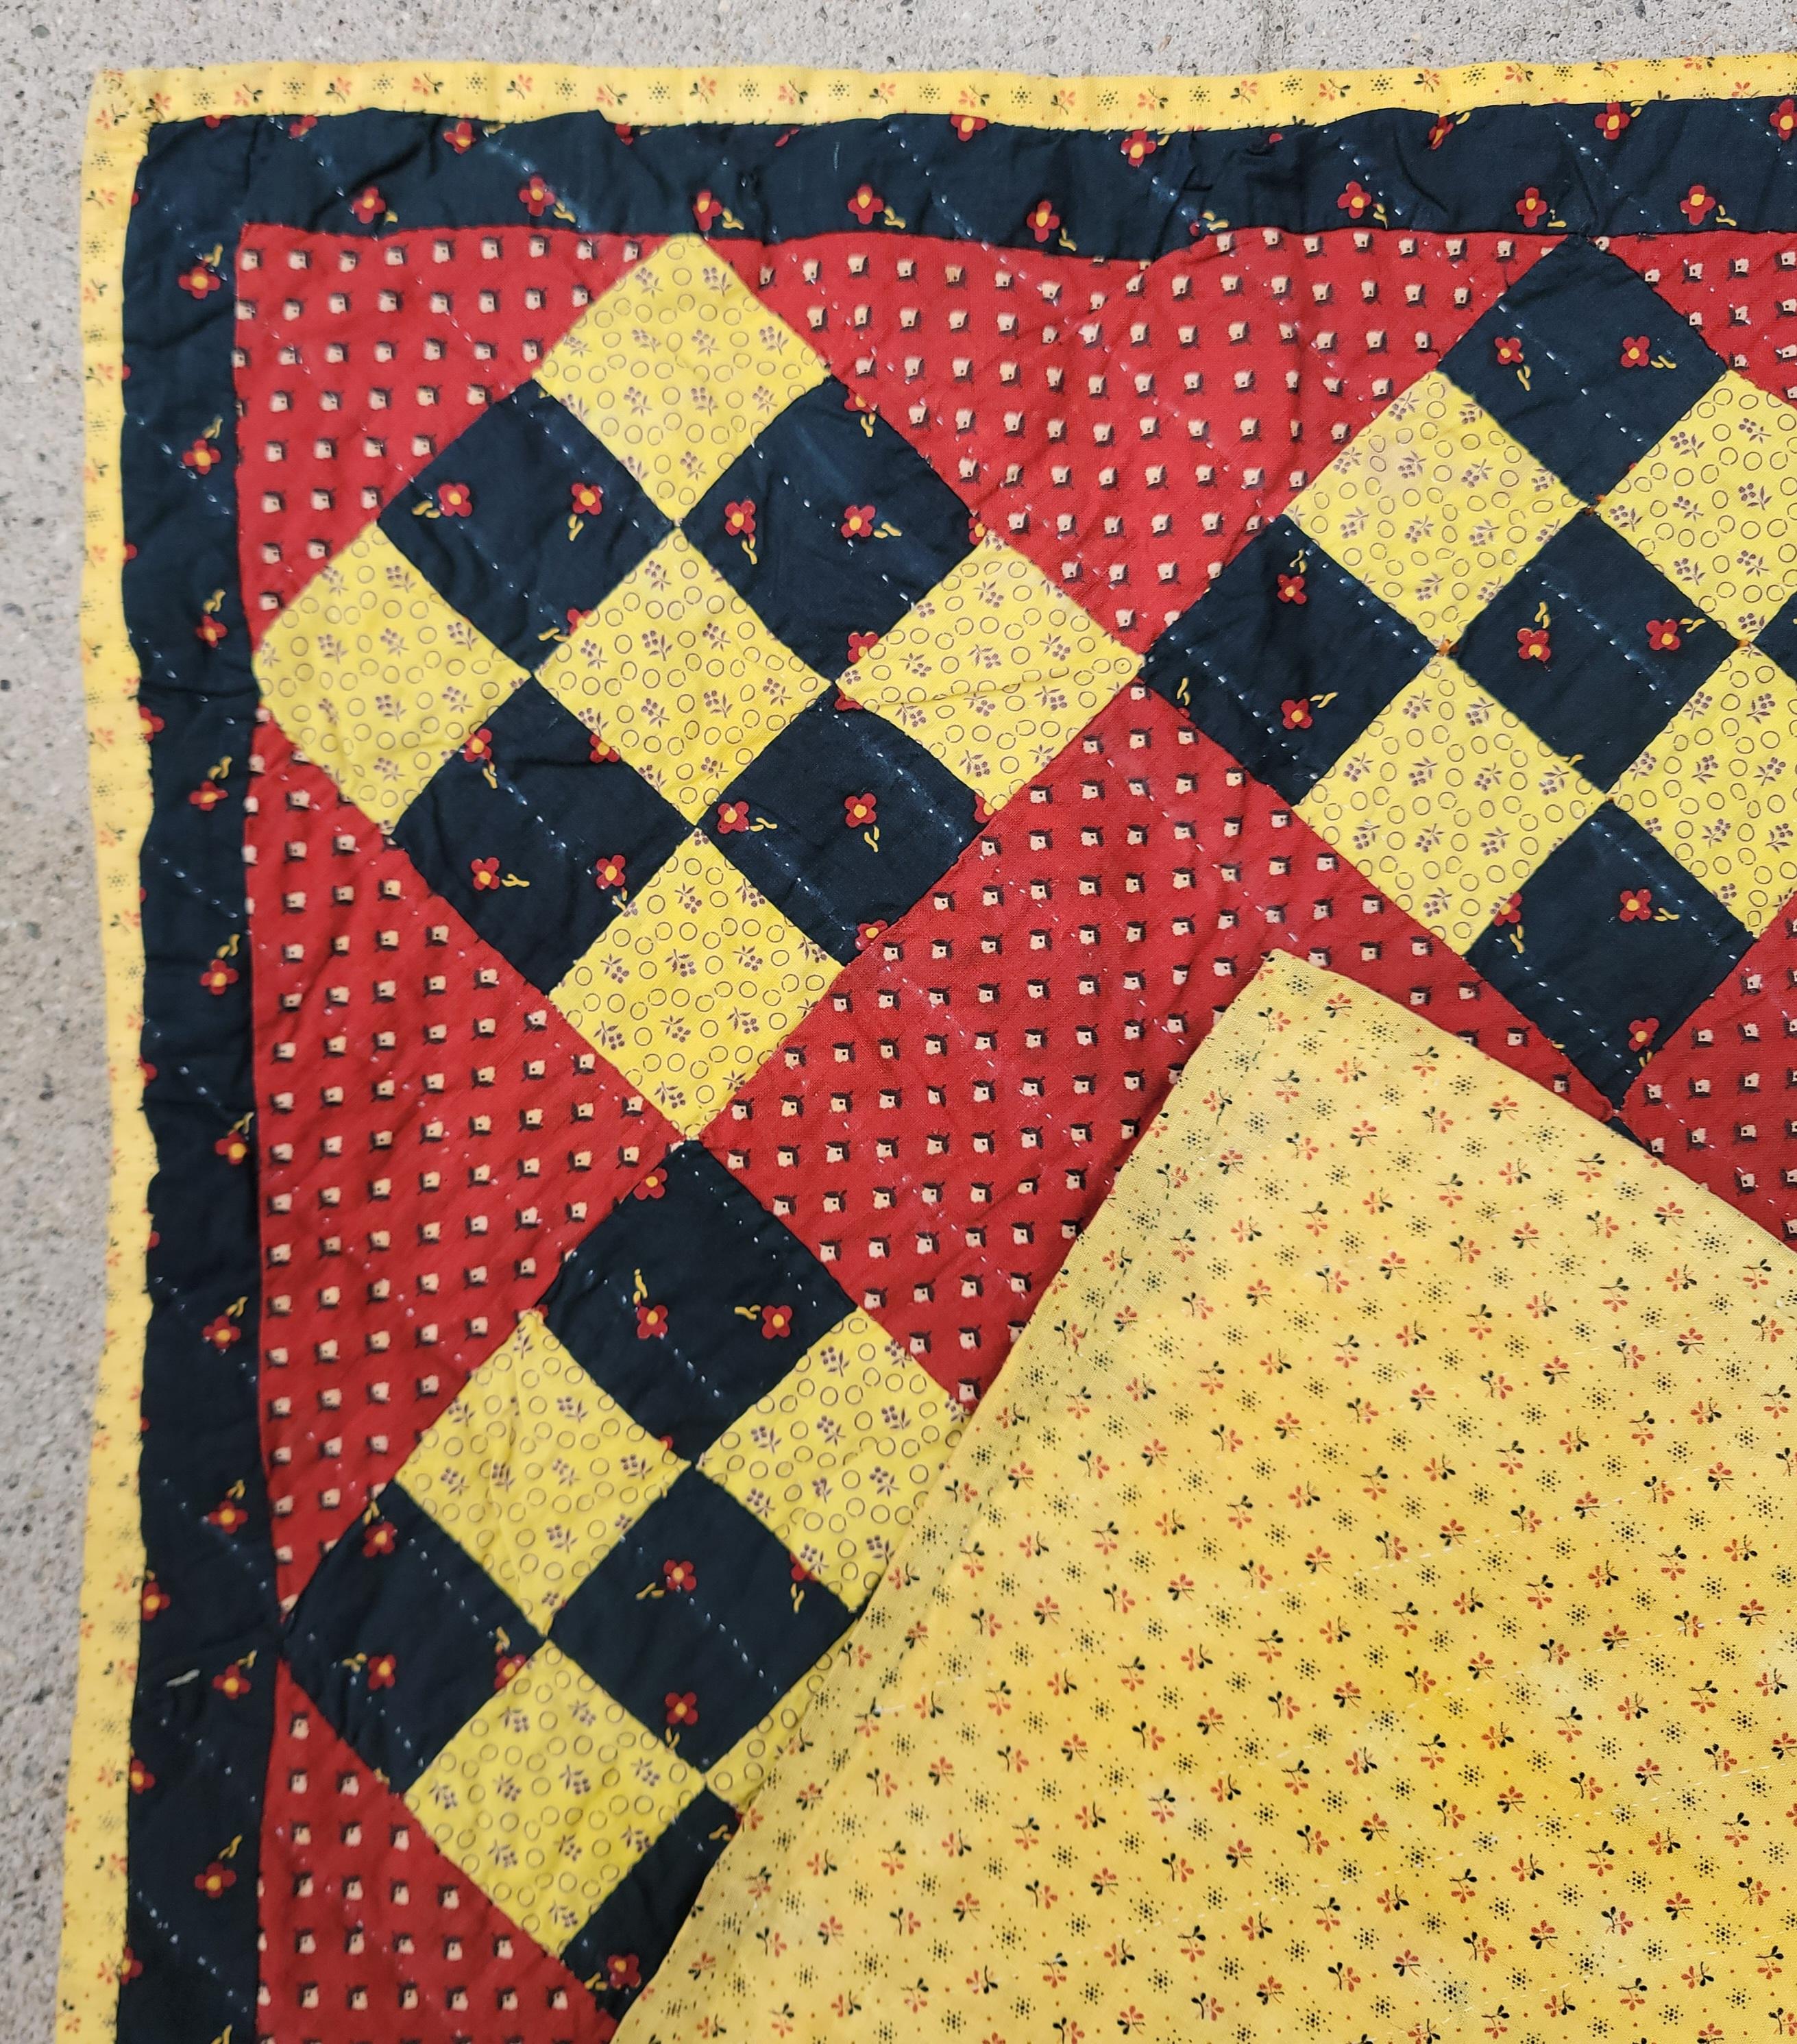 This amazing early fabrics crib quilt is in pristine condition. This nine patch quilt is from Berks County, Pennsylvania.